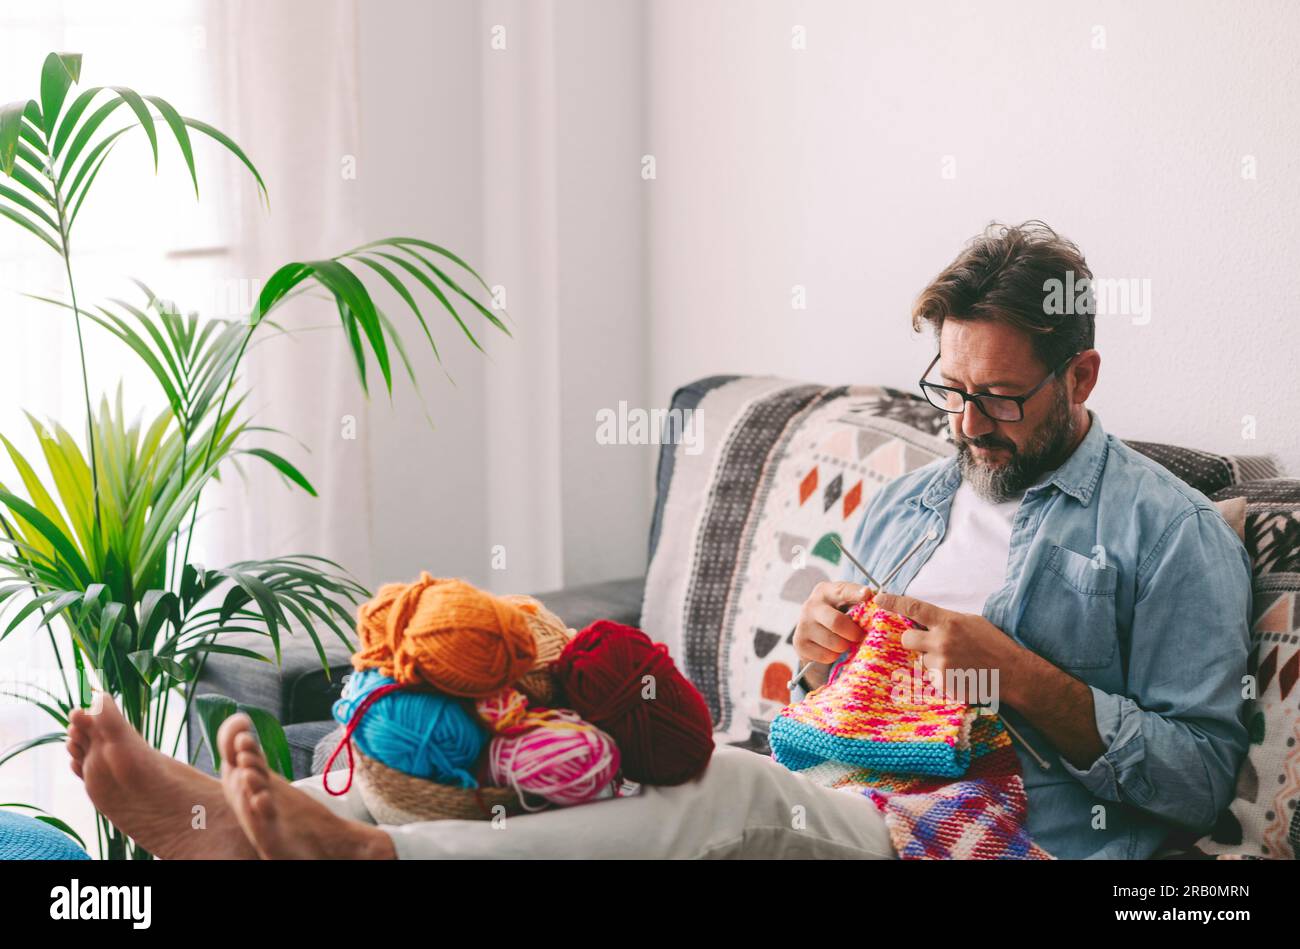 One man at home sitting on the sofa in relaxation indoor leisure activity alone doing knitting work with colorful wool and needles. Learning new things job in life. Relax lifestyle male people at home Stock Photo